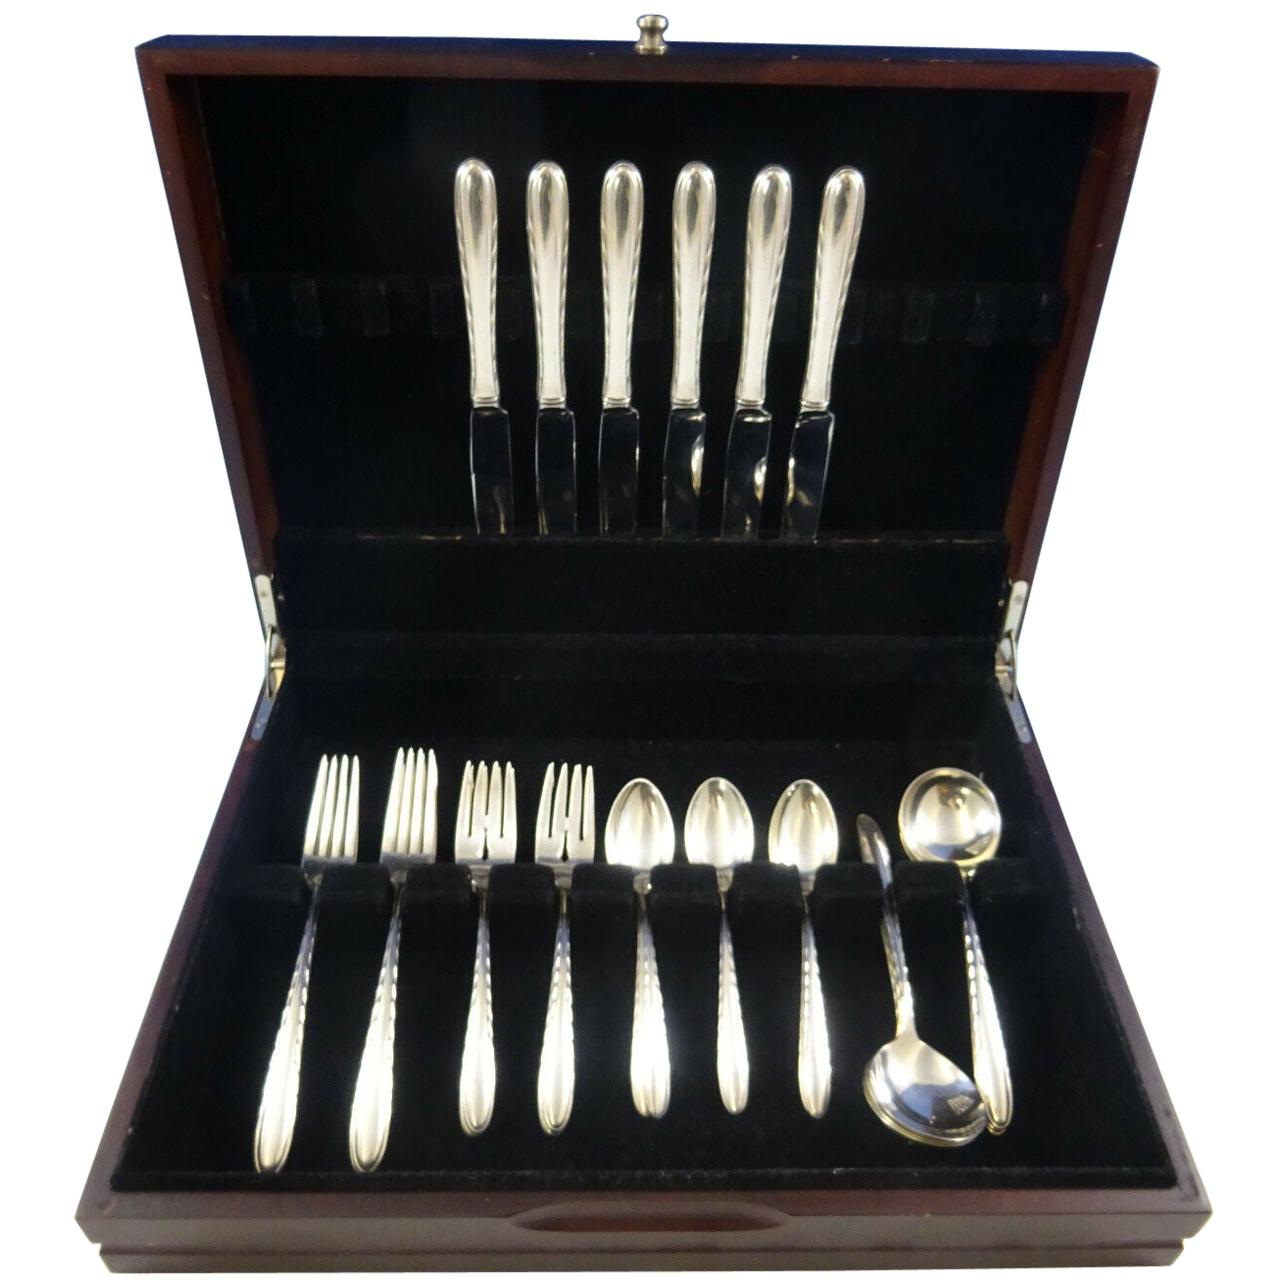 Silver Flutes by Towle Sterling Silver Flatware Set For 6 Service 30 Pieces